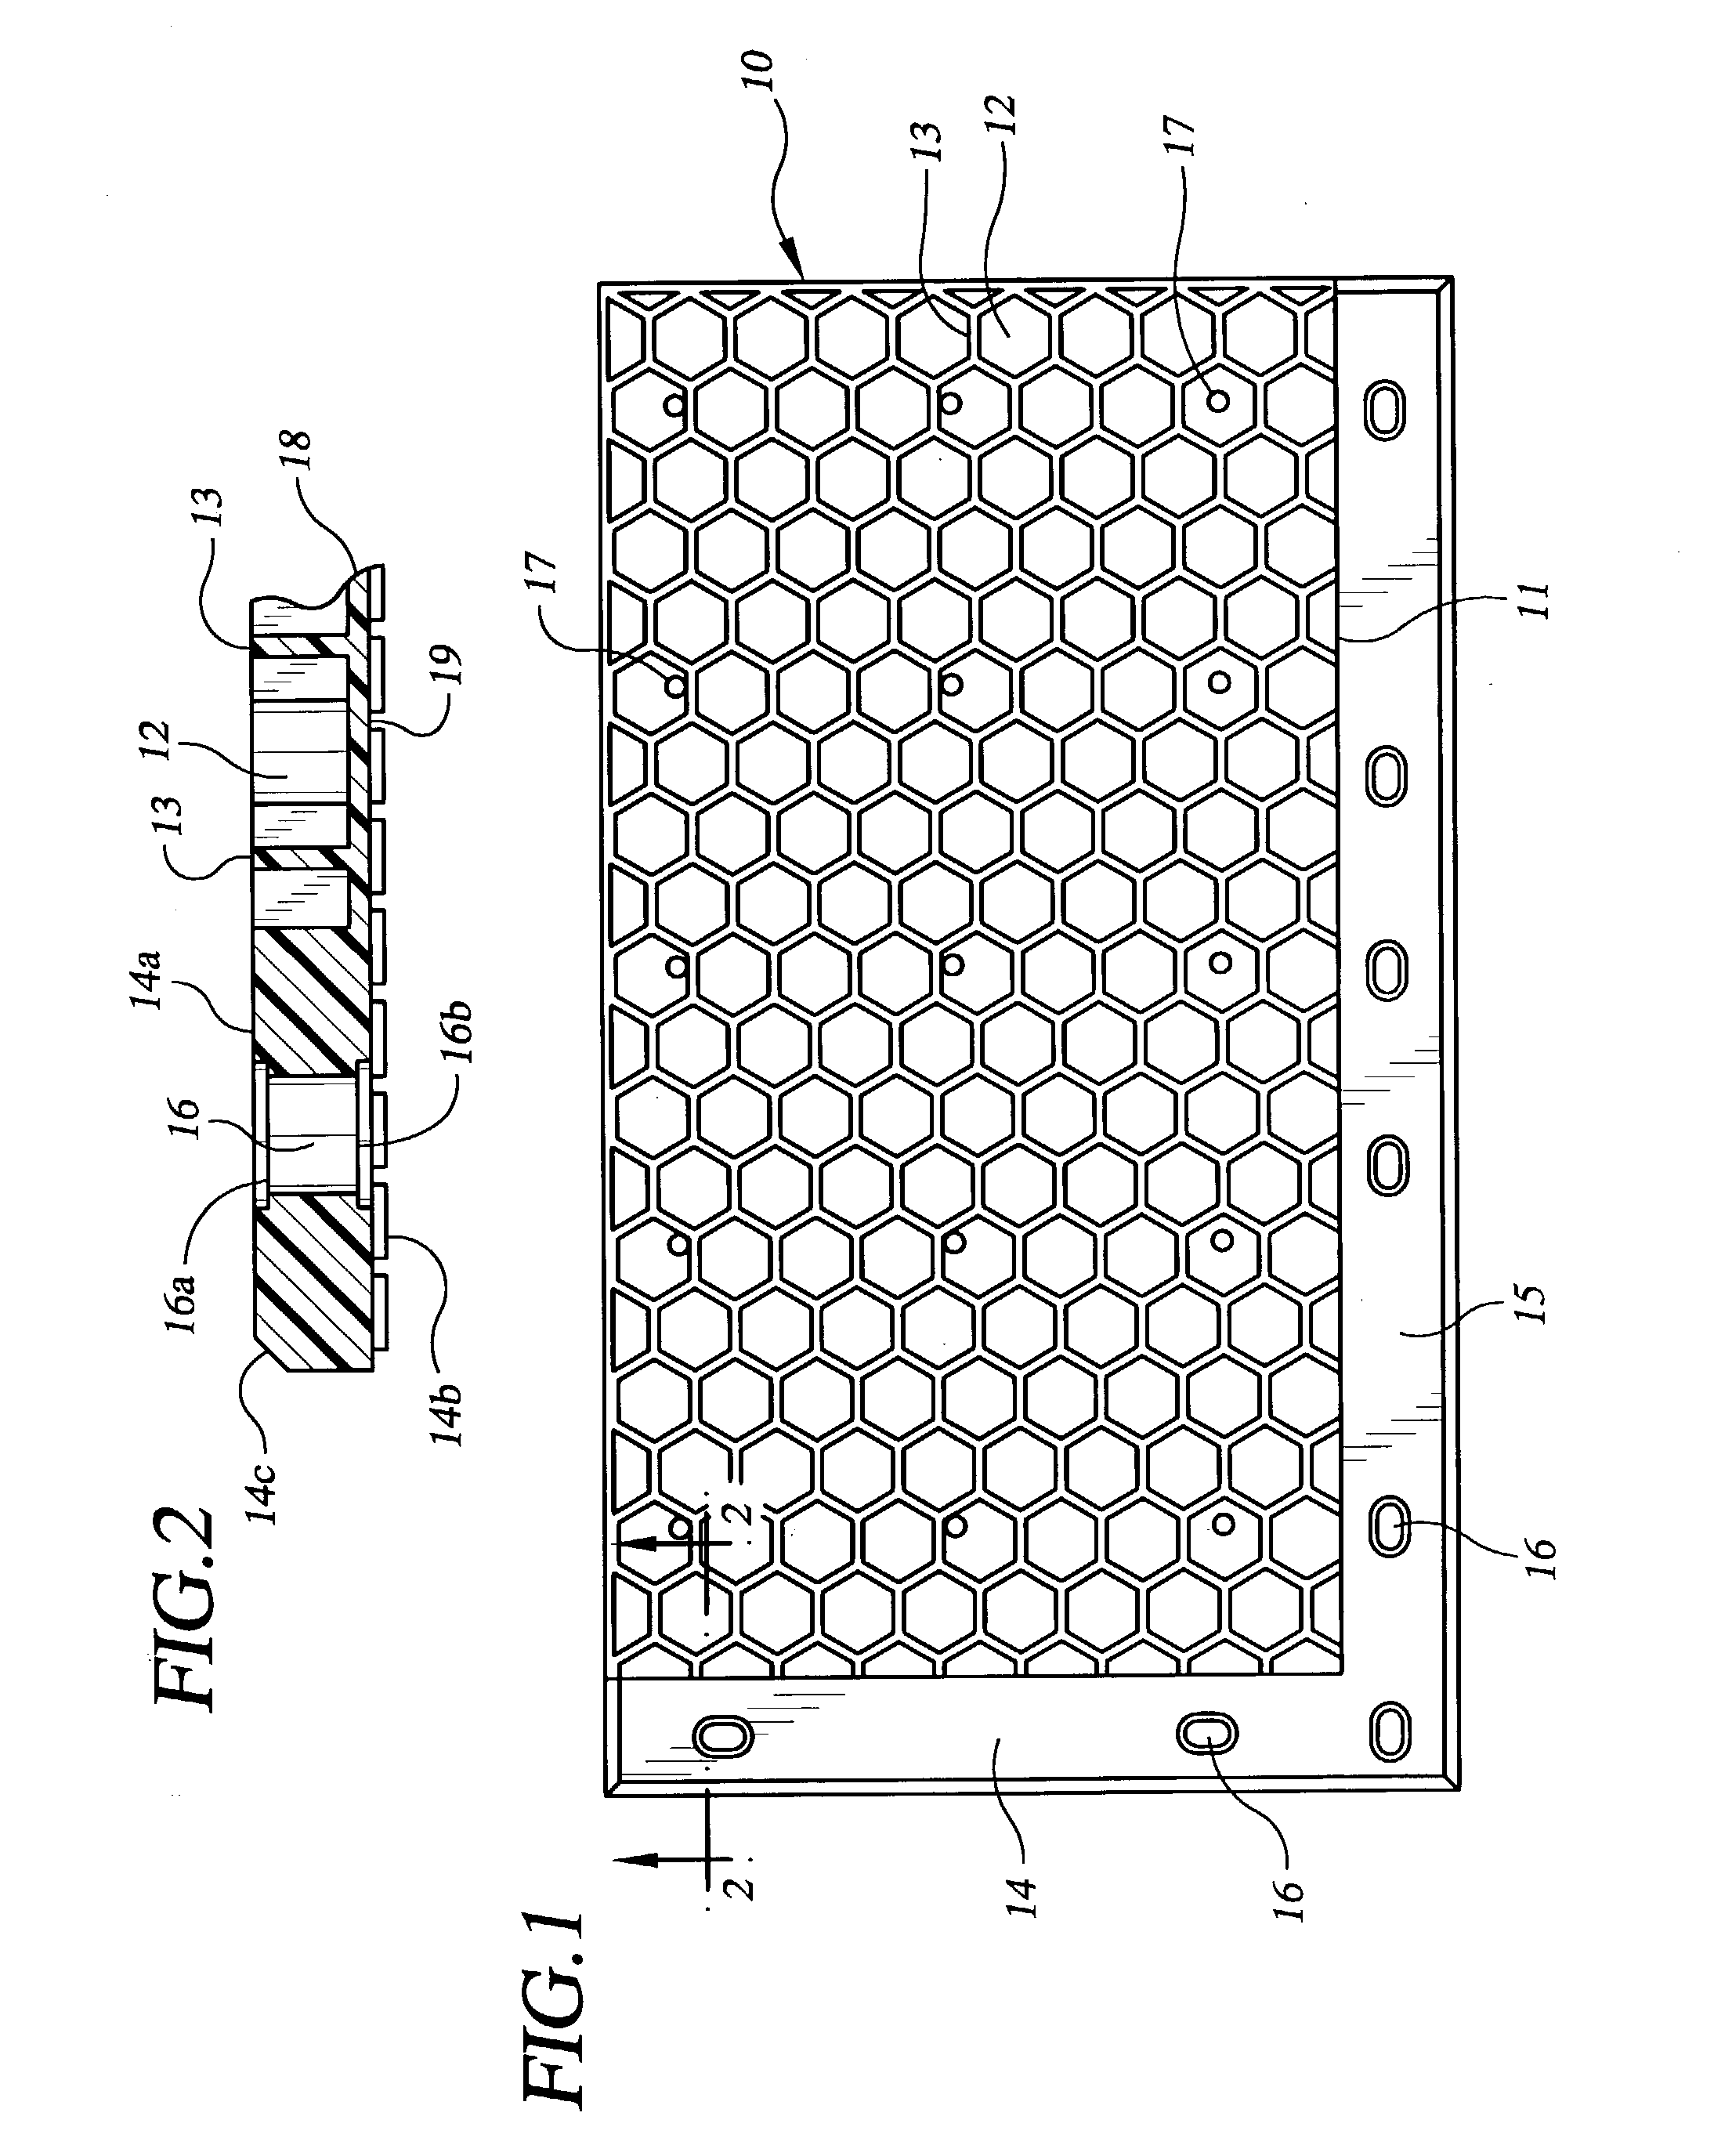 Interlocking mat system for construction of load supporting surfaces